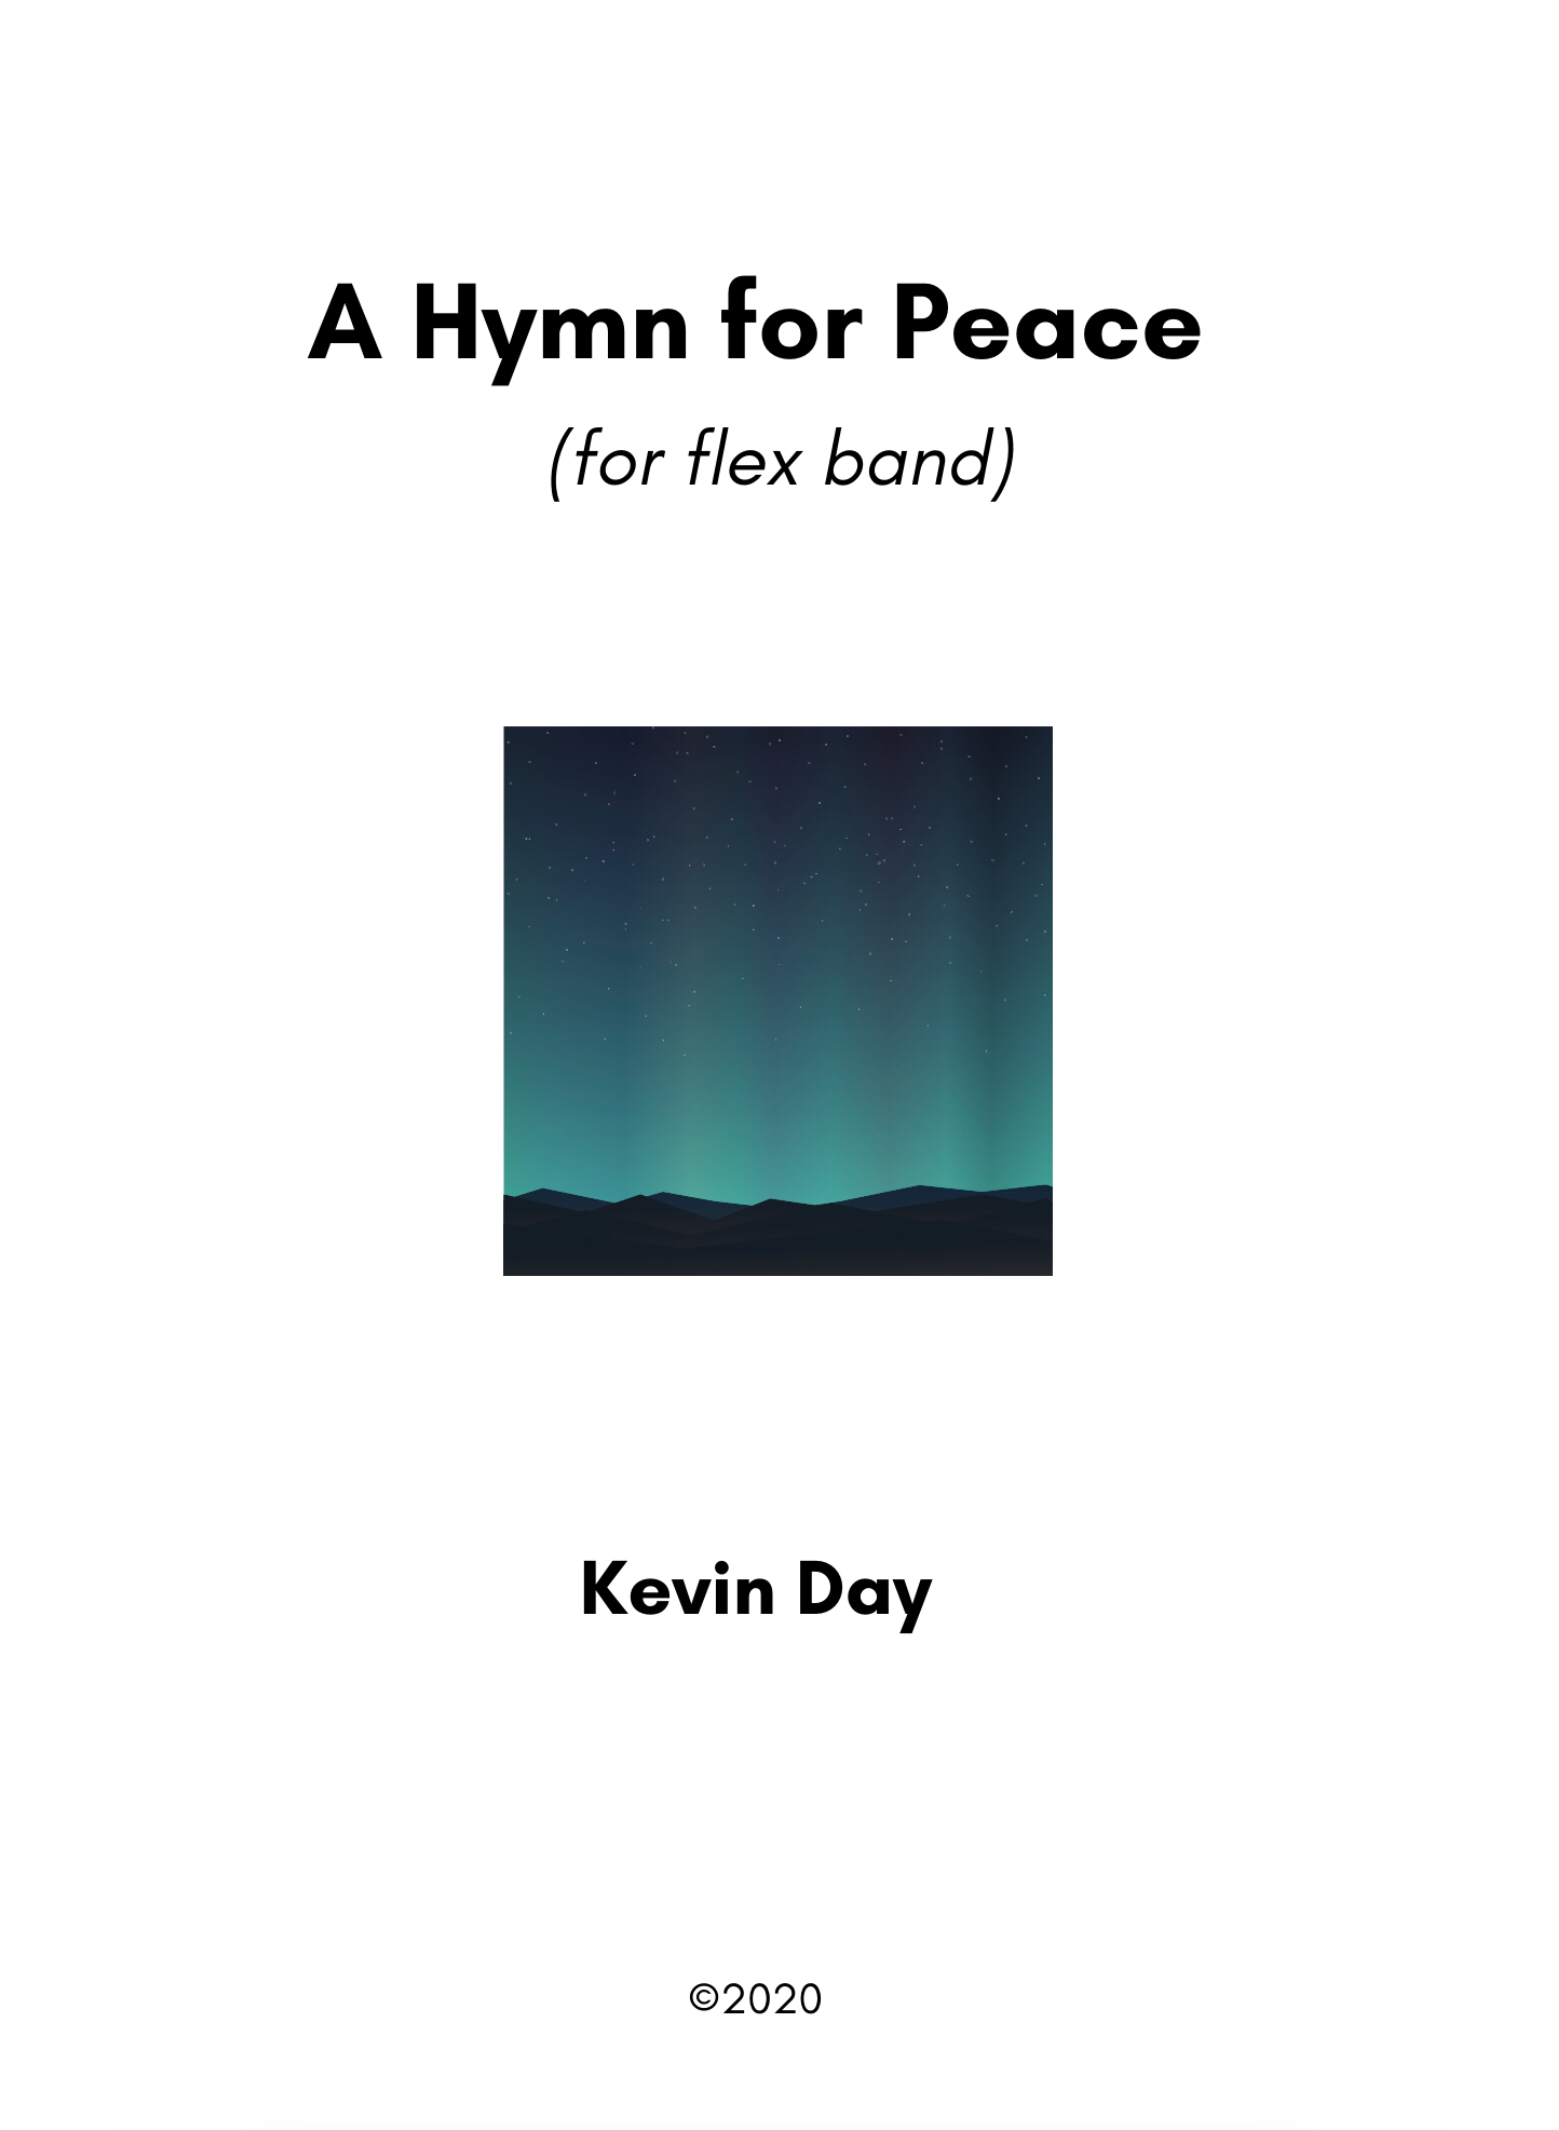 A Hymn For Peace (Flex Band Version) by Kevin Day